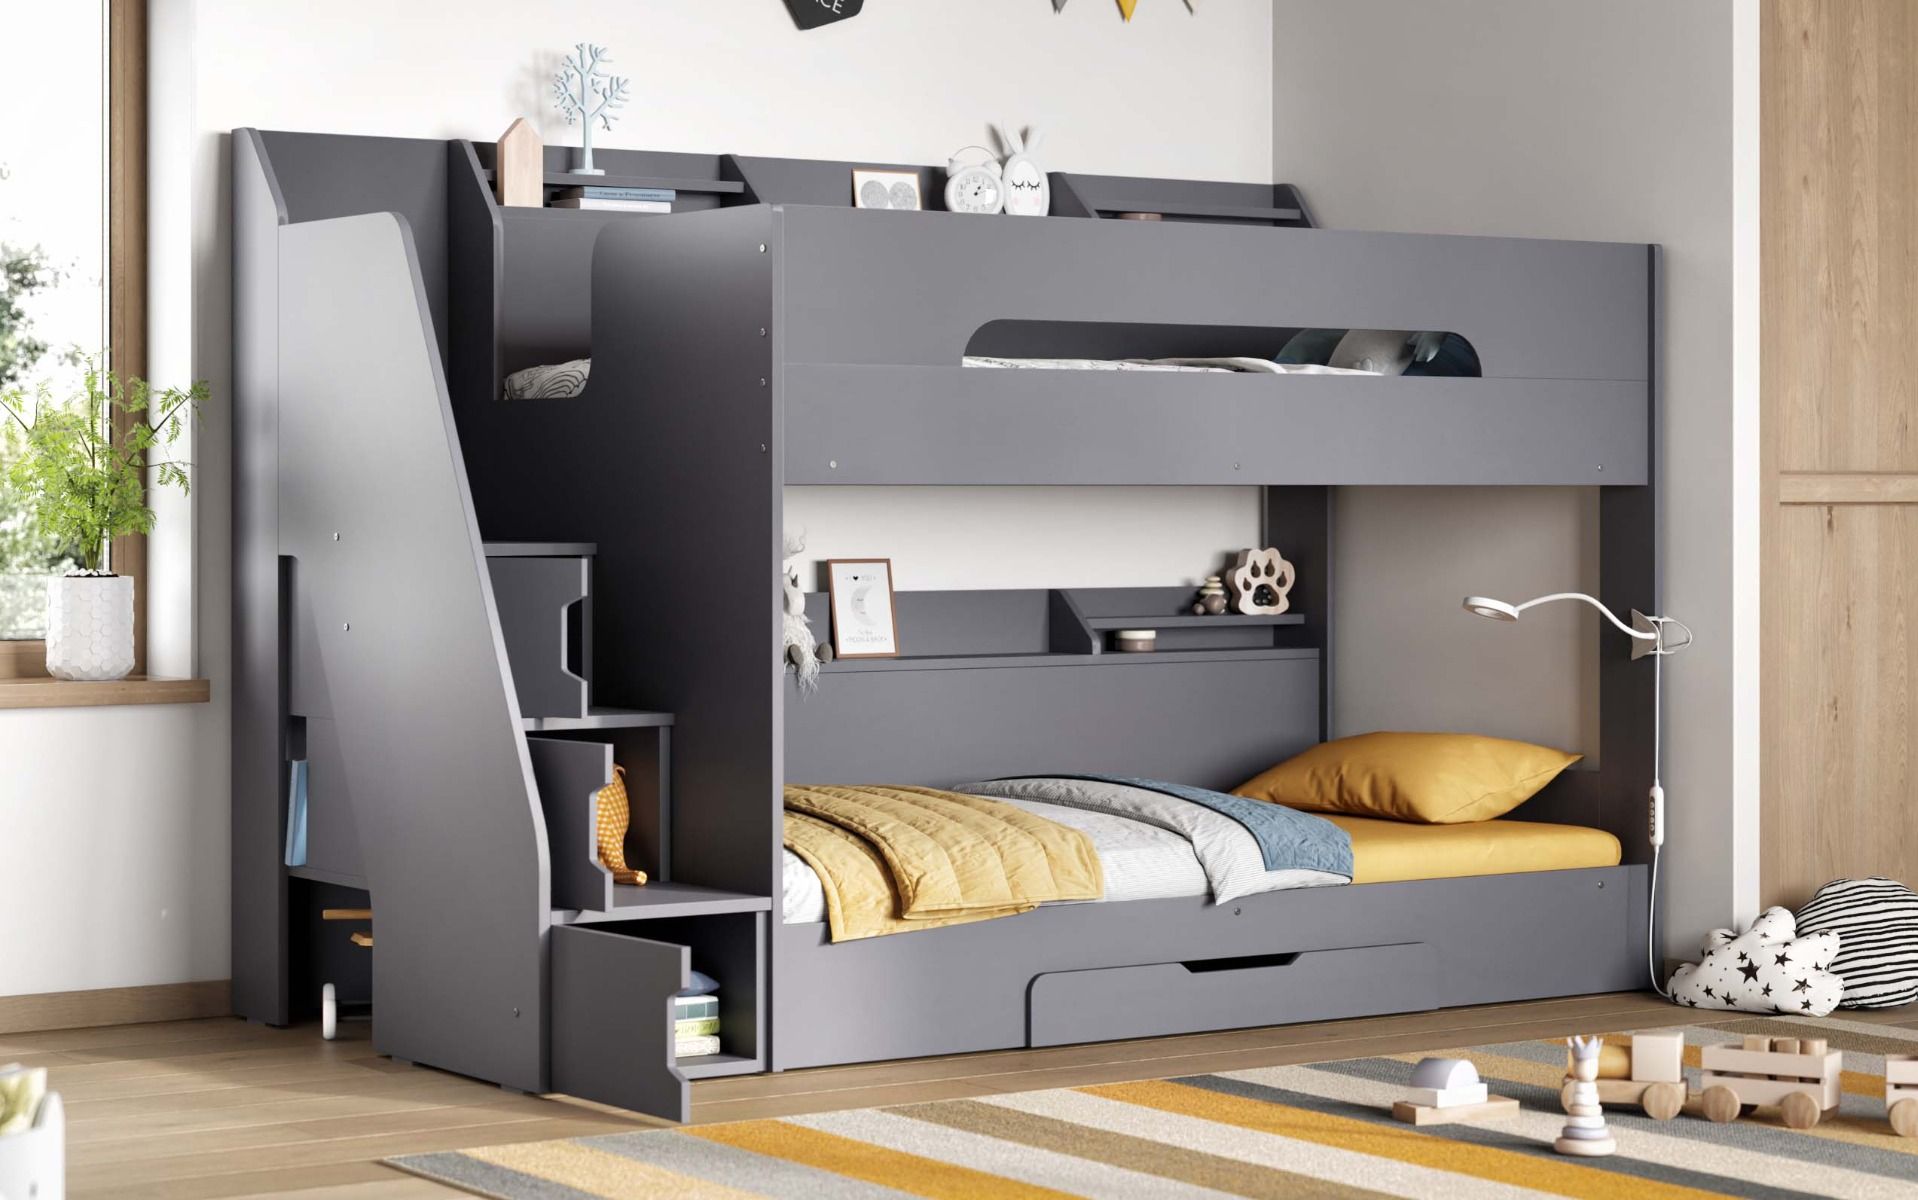 Flair Slick Staircase Bunk Bed With Storage - Grey